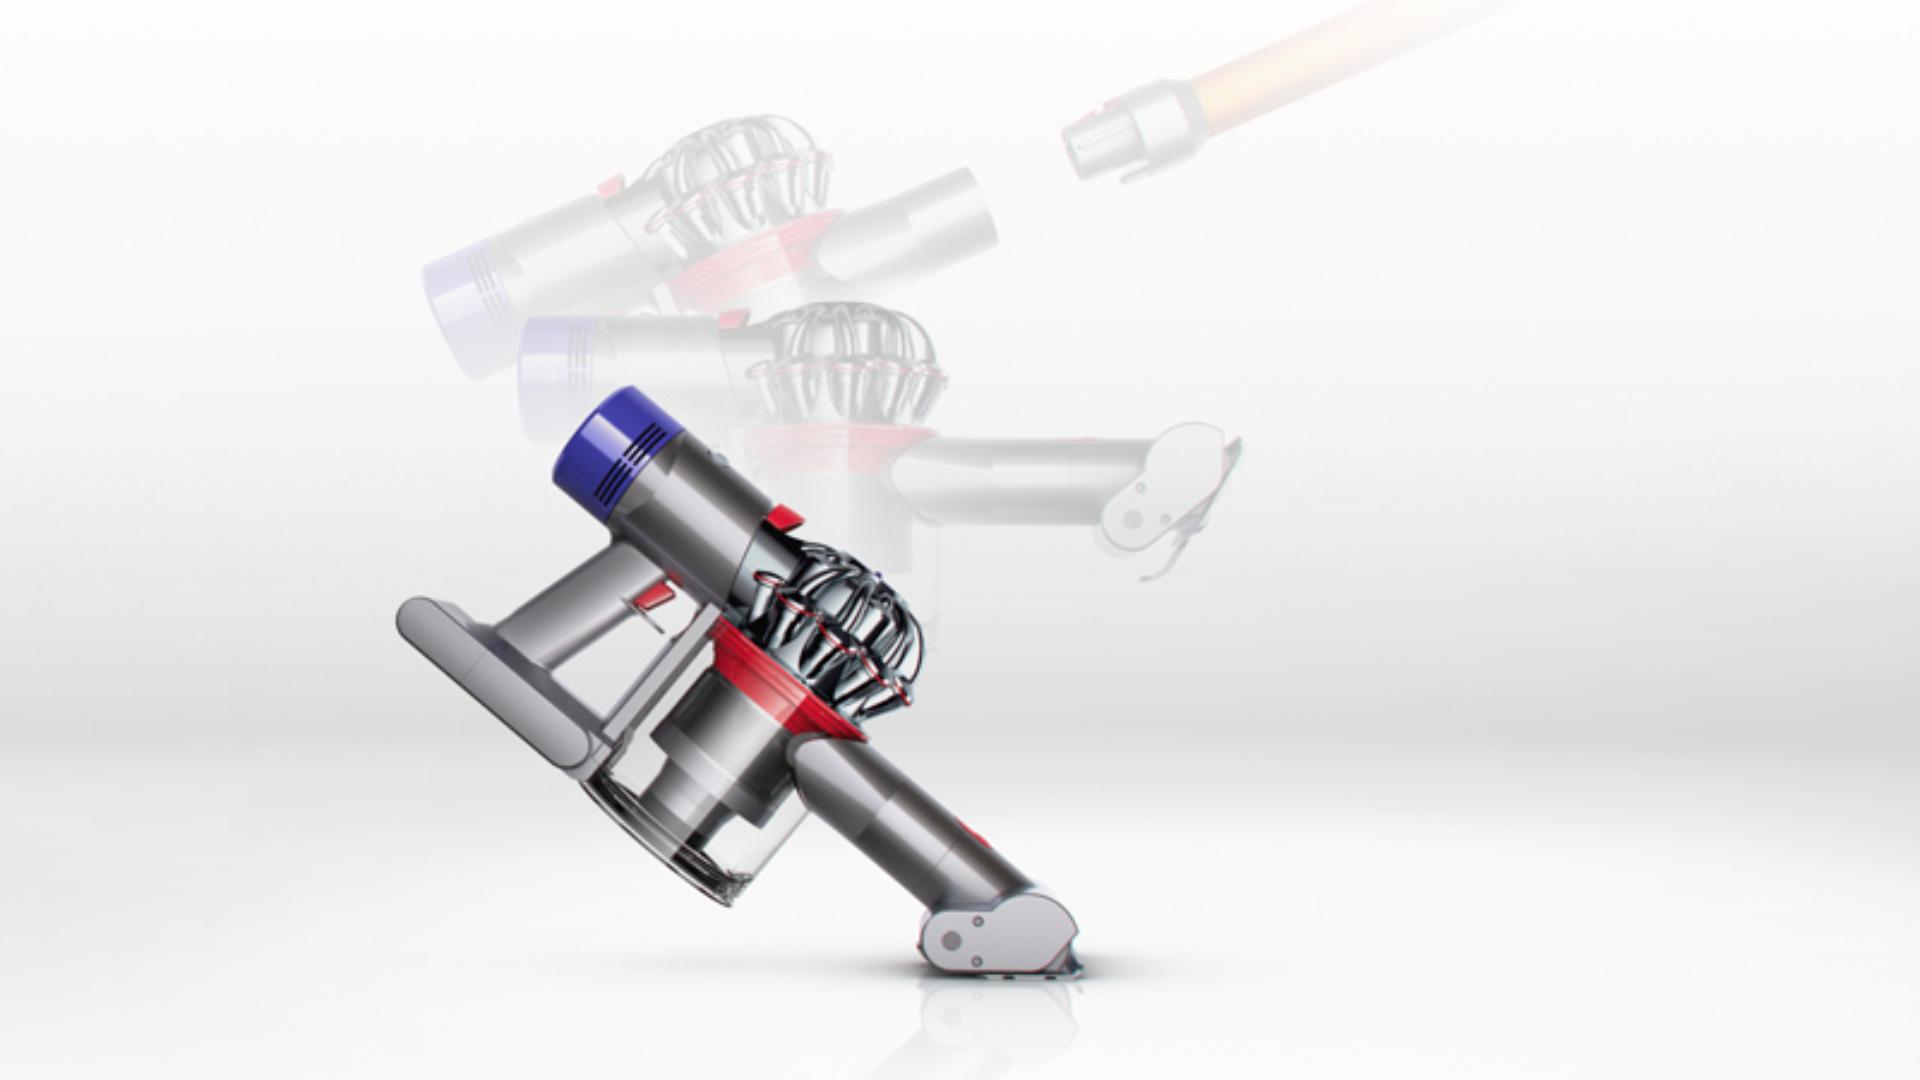 Demonstrating Dyson V8 Absolute transforming to a handheld in one click.